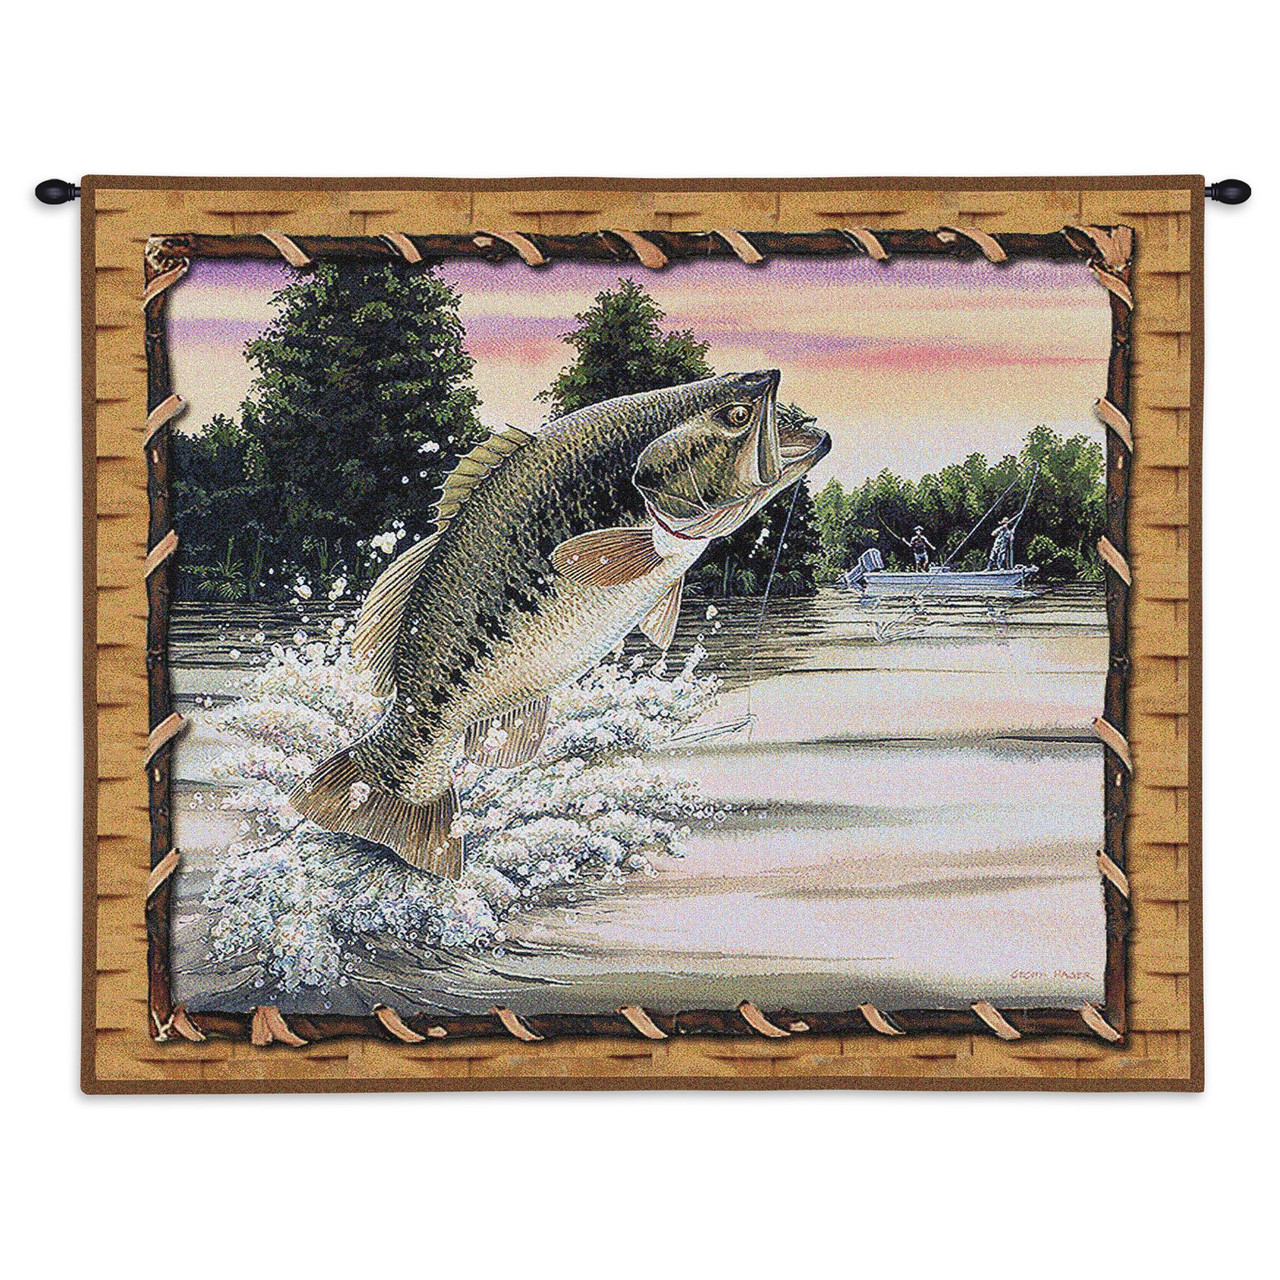 Bass Attack, Woven Tapestry Wall Art Hanging